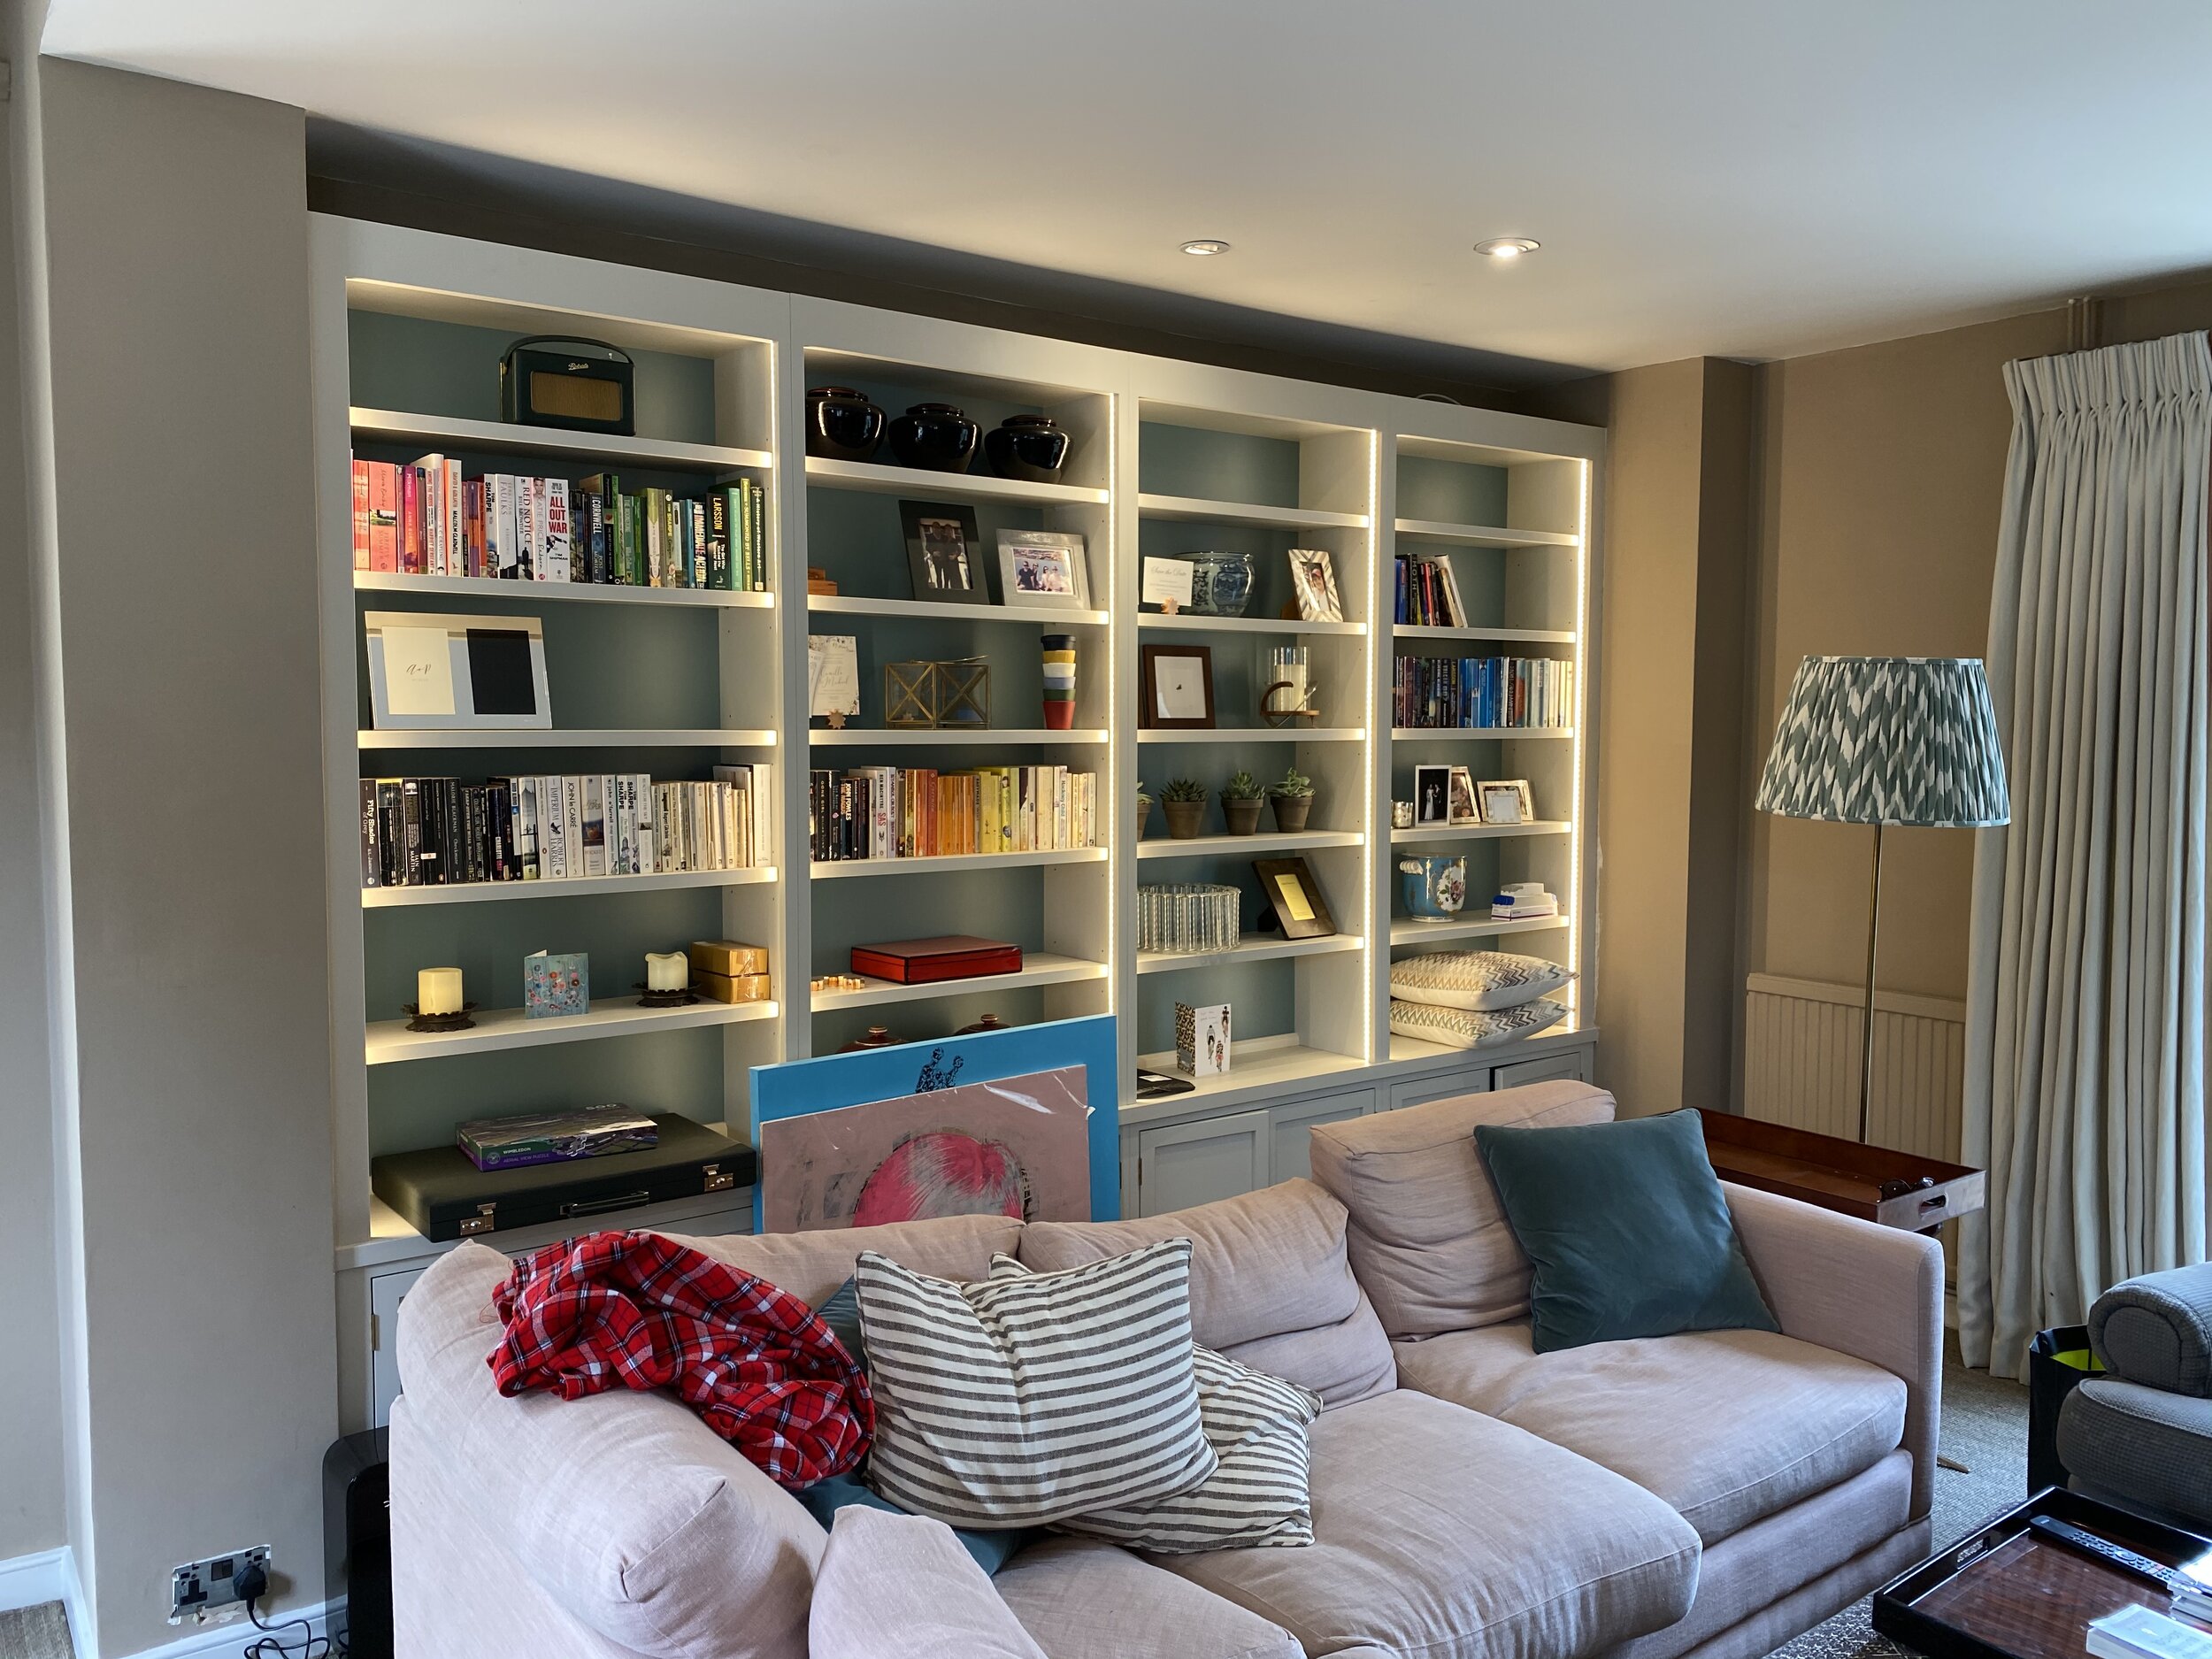 Interior of a living room with built in bookcases and LED downlights